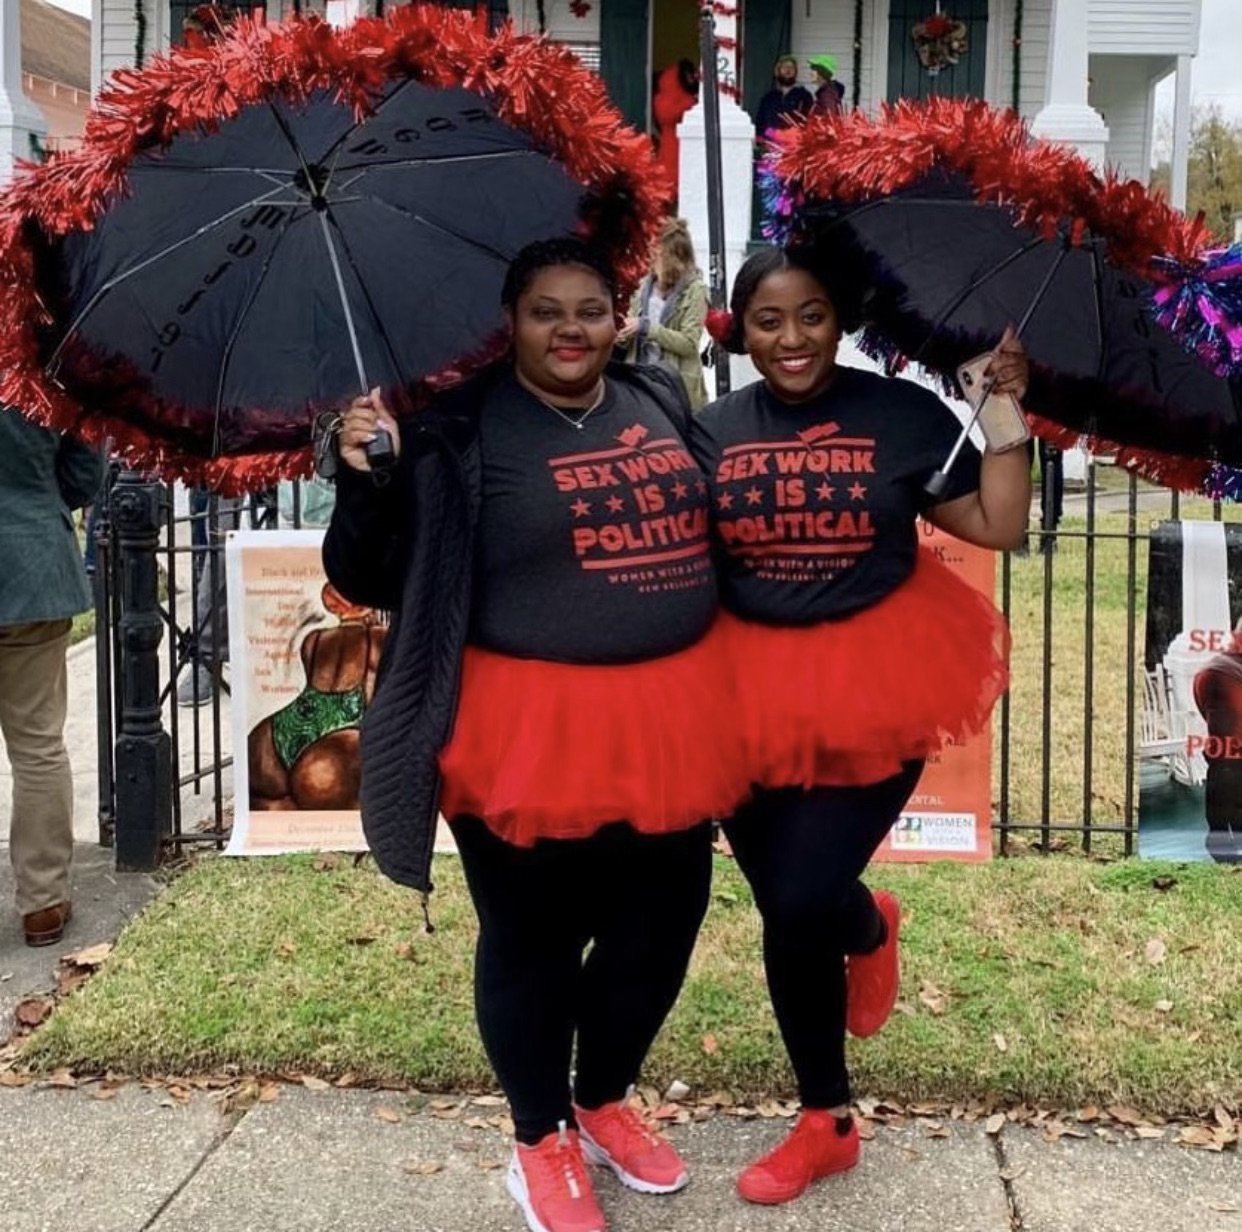  Raven Frederick and Elsye Defree in their “Sex Work is Political” T-shirts, holding red umbrellas before the 2nd Annual Black and Brown Sex Worker Second Line begins on the International Day to End Violence Against Sex Workers, December 15, 2018.  P